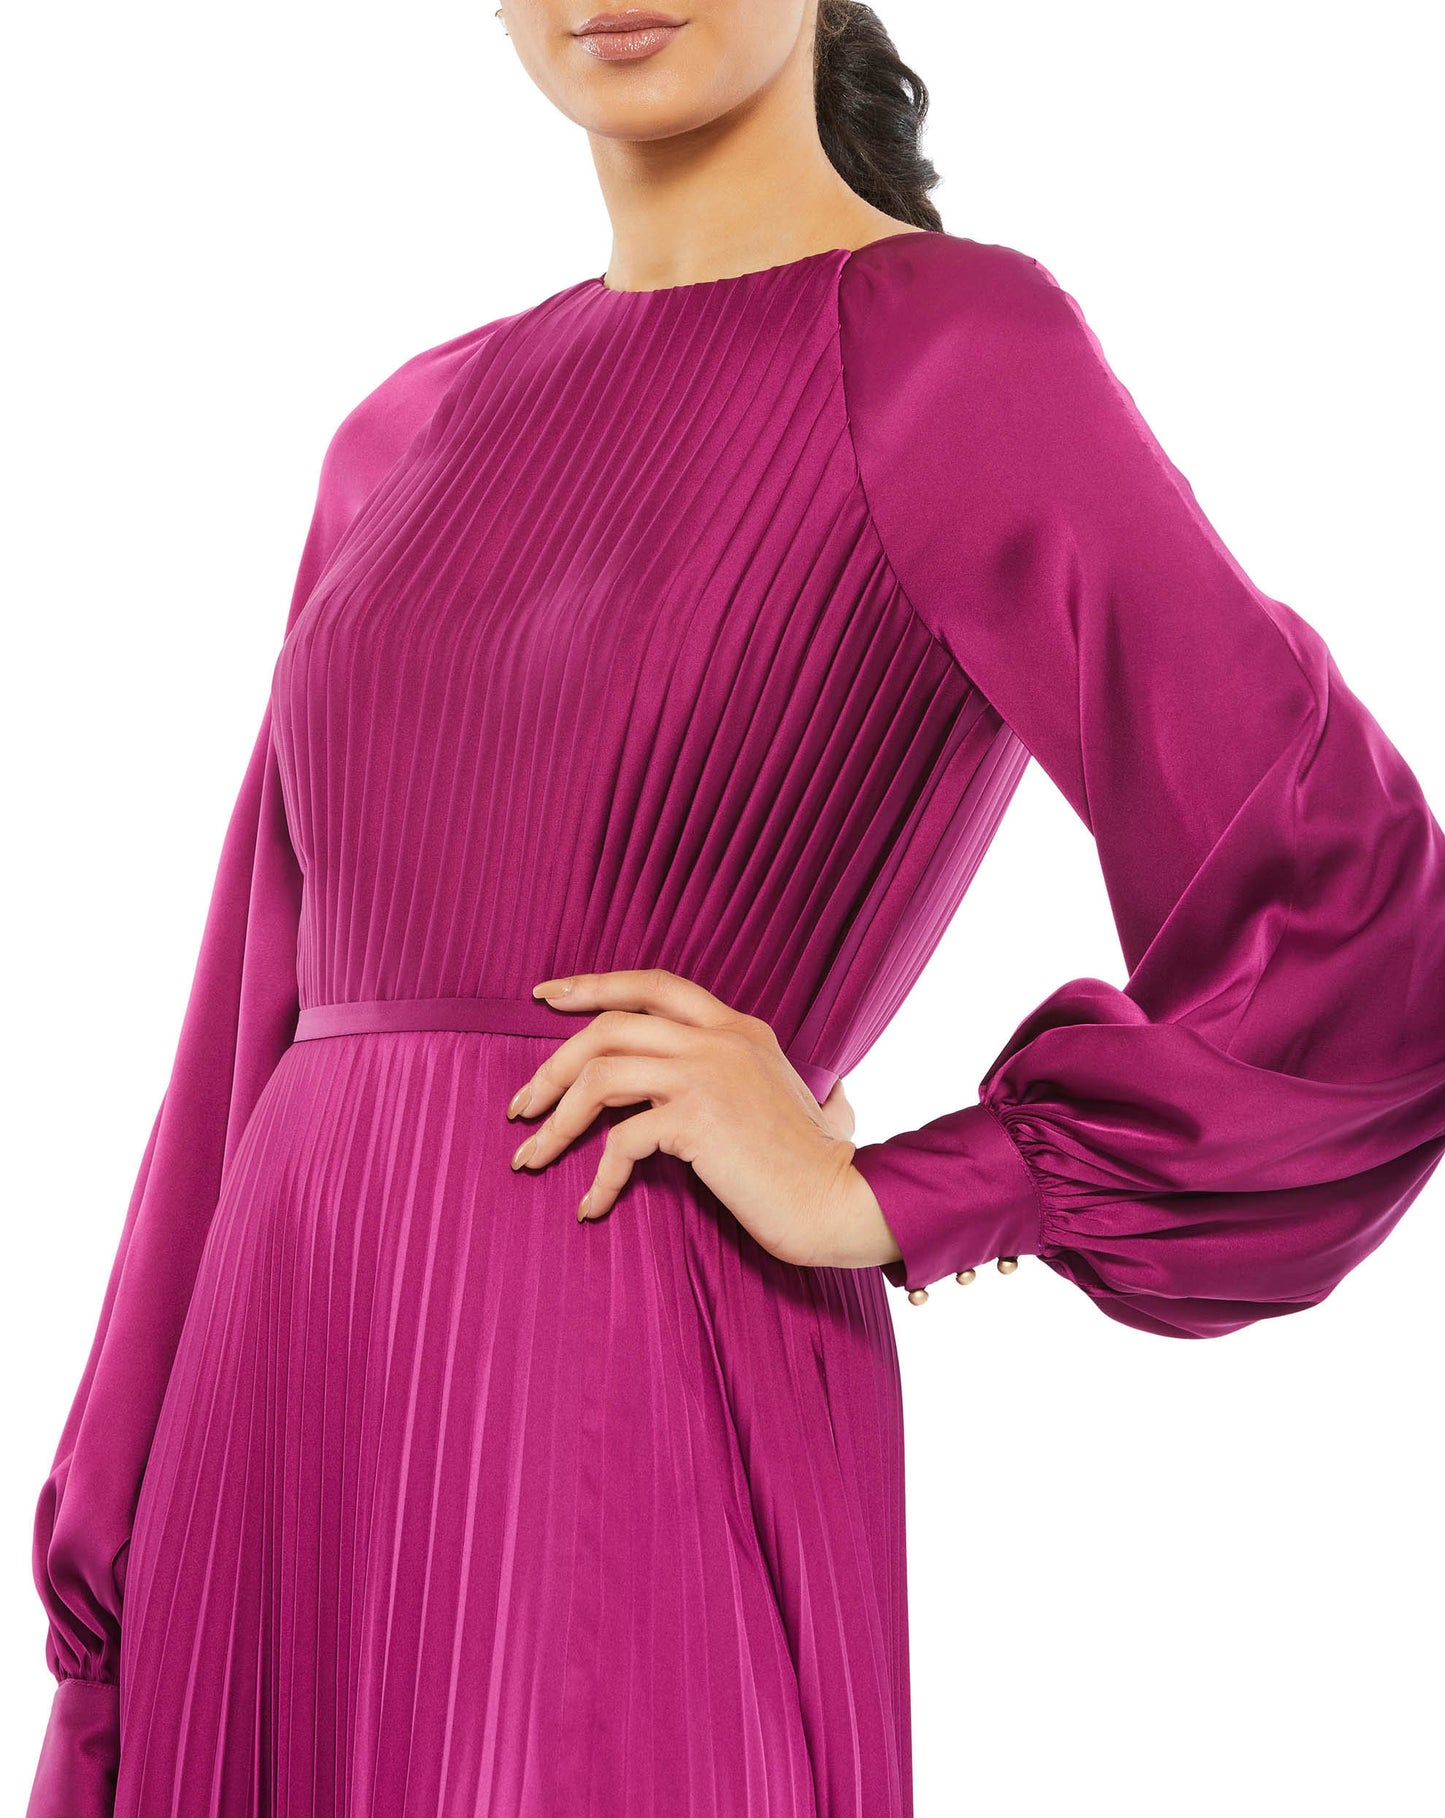 Long sleeve pleated gown with a high neckline, blouson sleeves, pleated bodice and skirt, and a thigh-high slit. Ieena for Mac Duggal 100% Polyester Back Zipper Full Length Long Sleeves Thigh-High Slit Style #26590